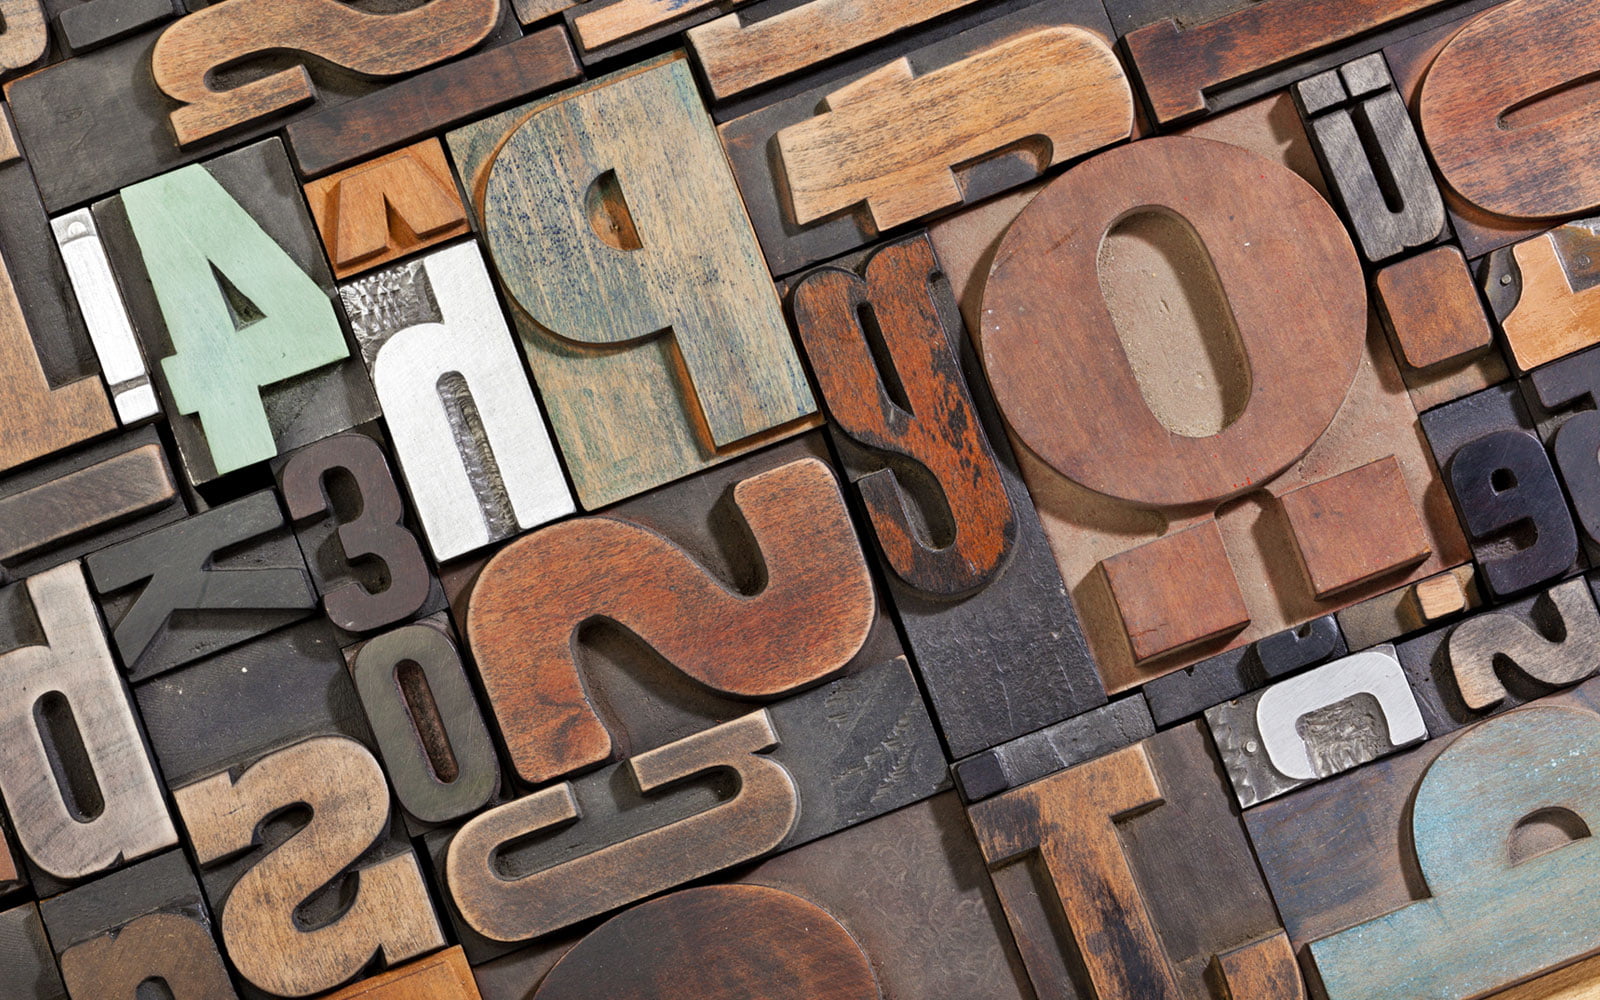 Picking the best fonts for your website